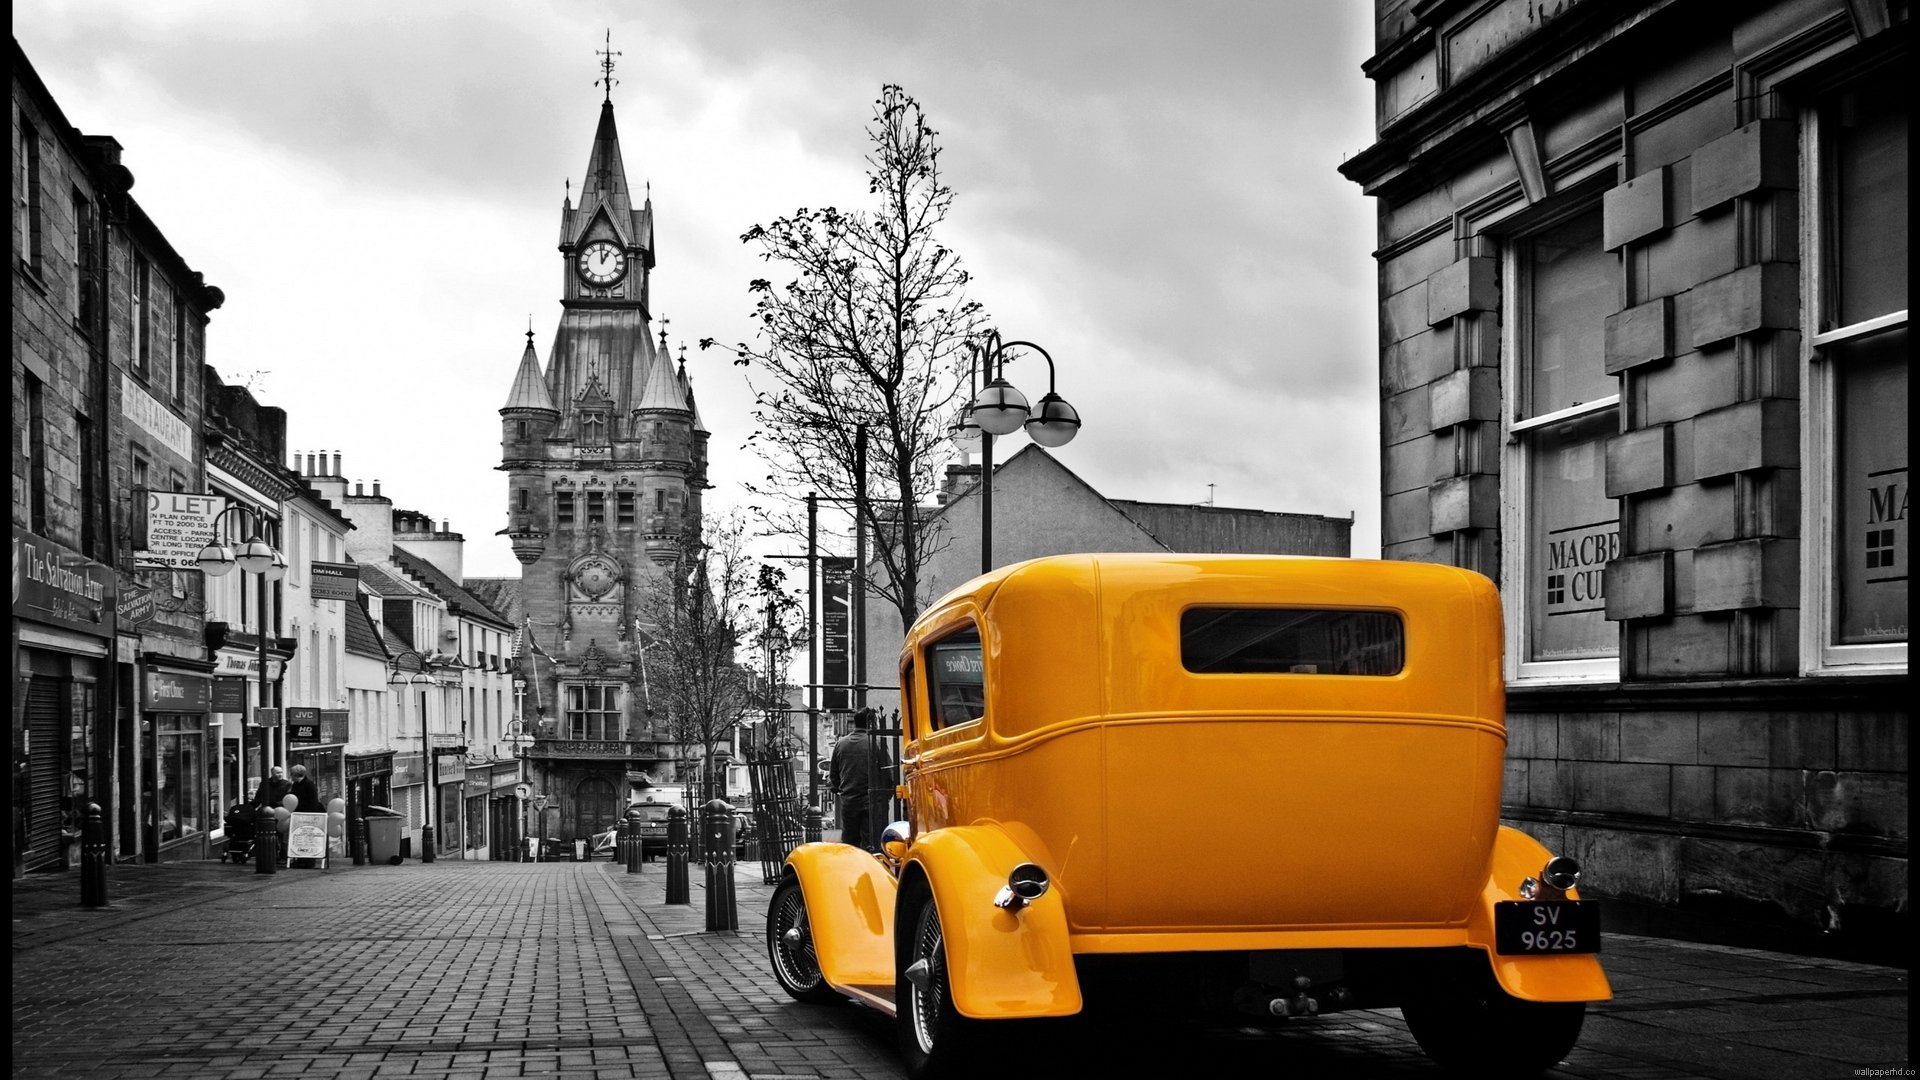 city, Car, Scotland, Dunfermline, UK, Church, Selective coloring, Model T, Ford, Street, Hot Rod, Yellow cars Wallpaper